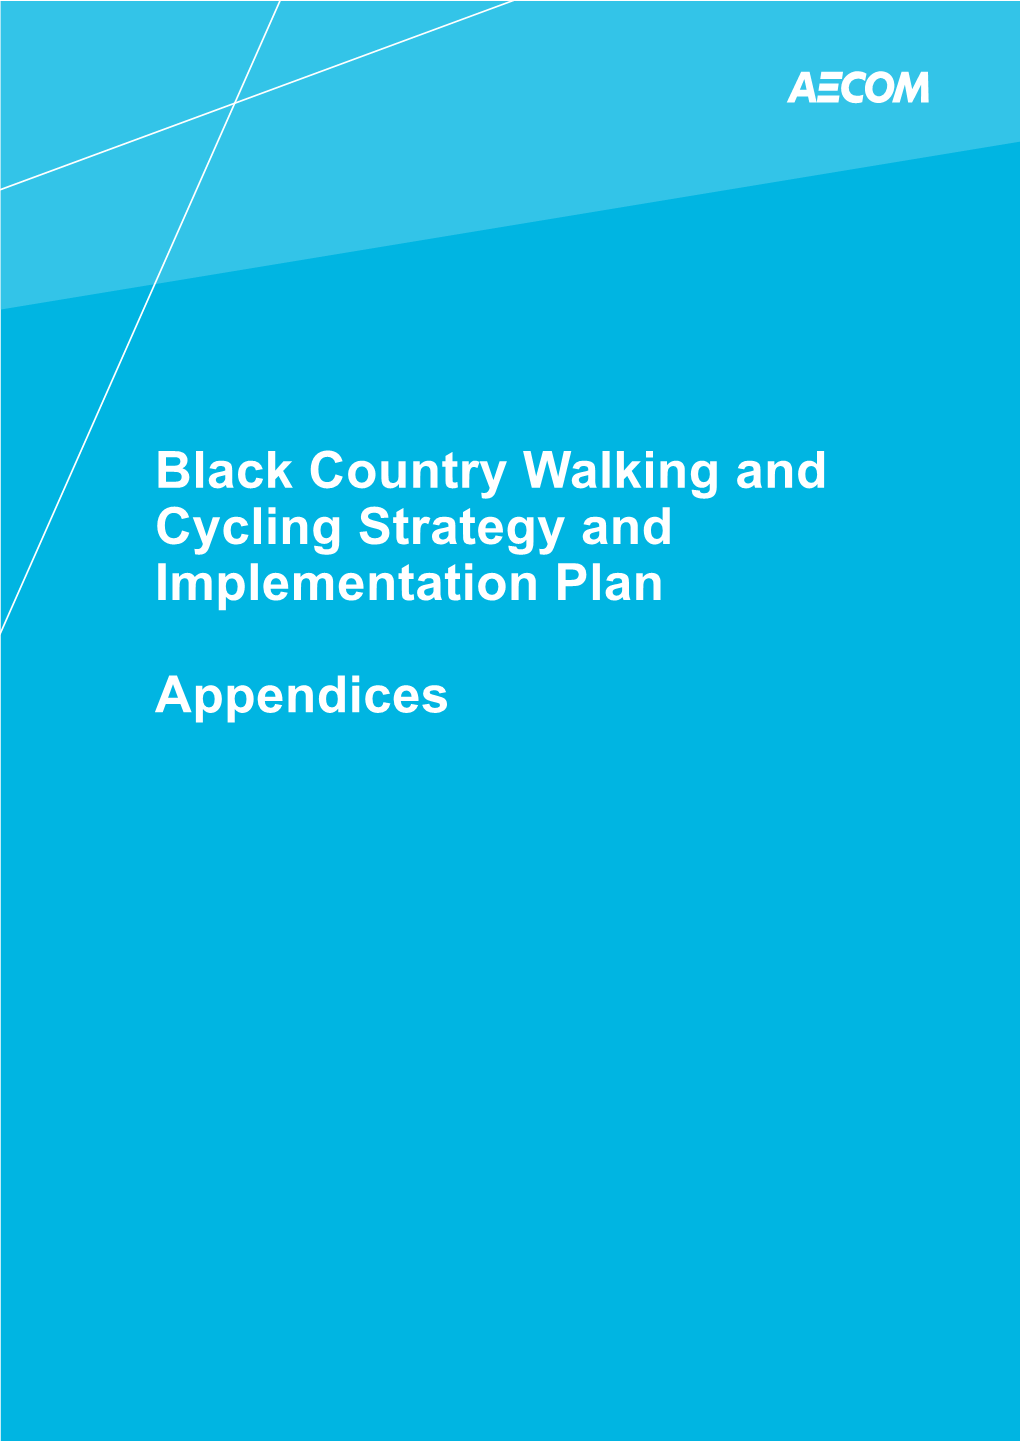 Black Country Walking and Cycling Strategy and Implementation Plan